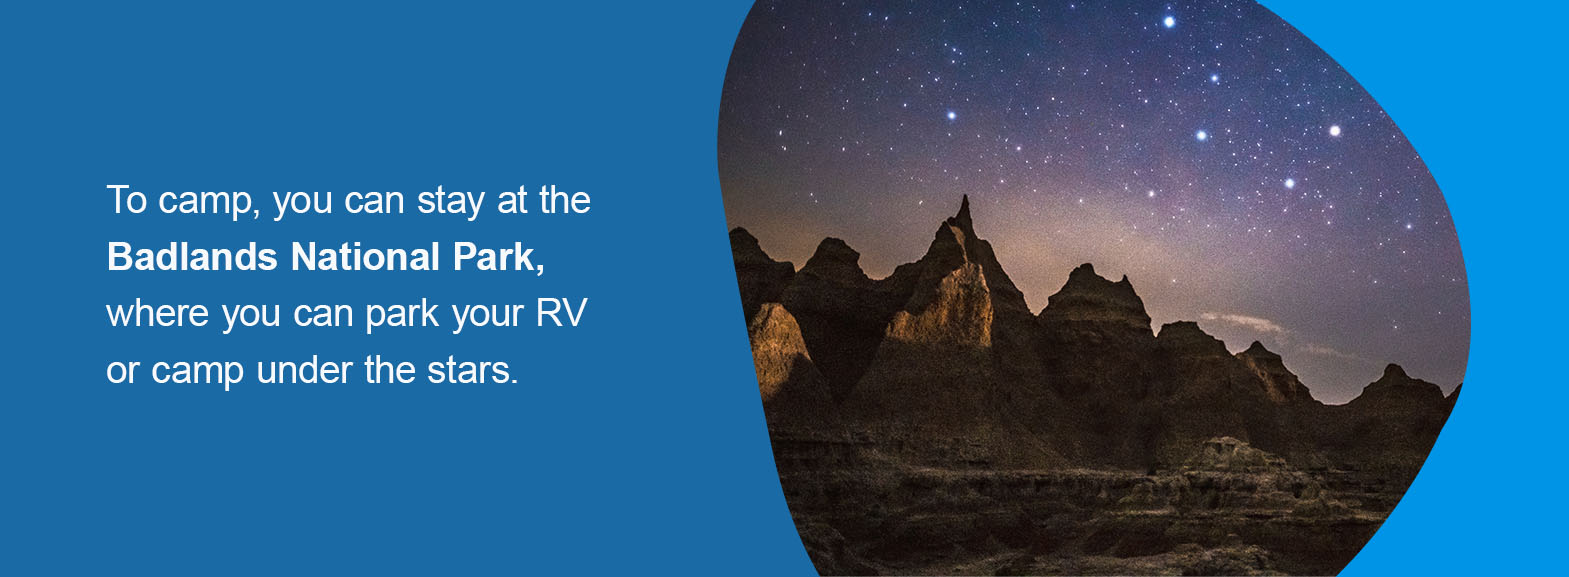 To camp, you can stay at the Badlands National Park, where you can park your RV or camp under the stars.